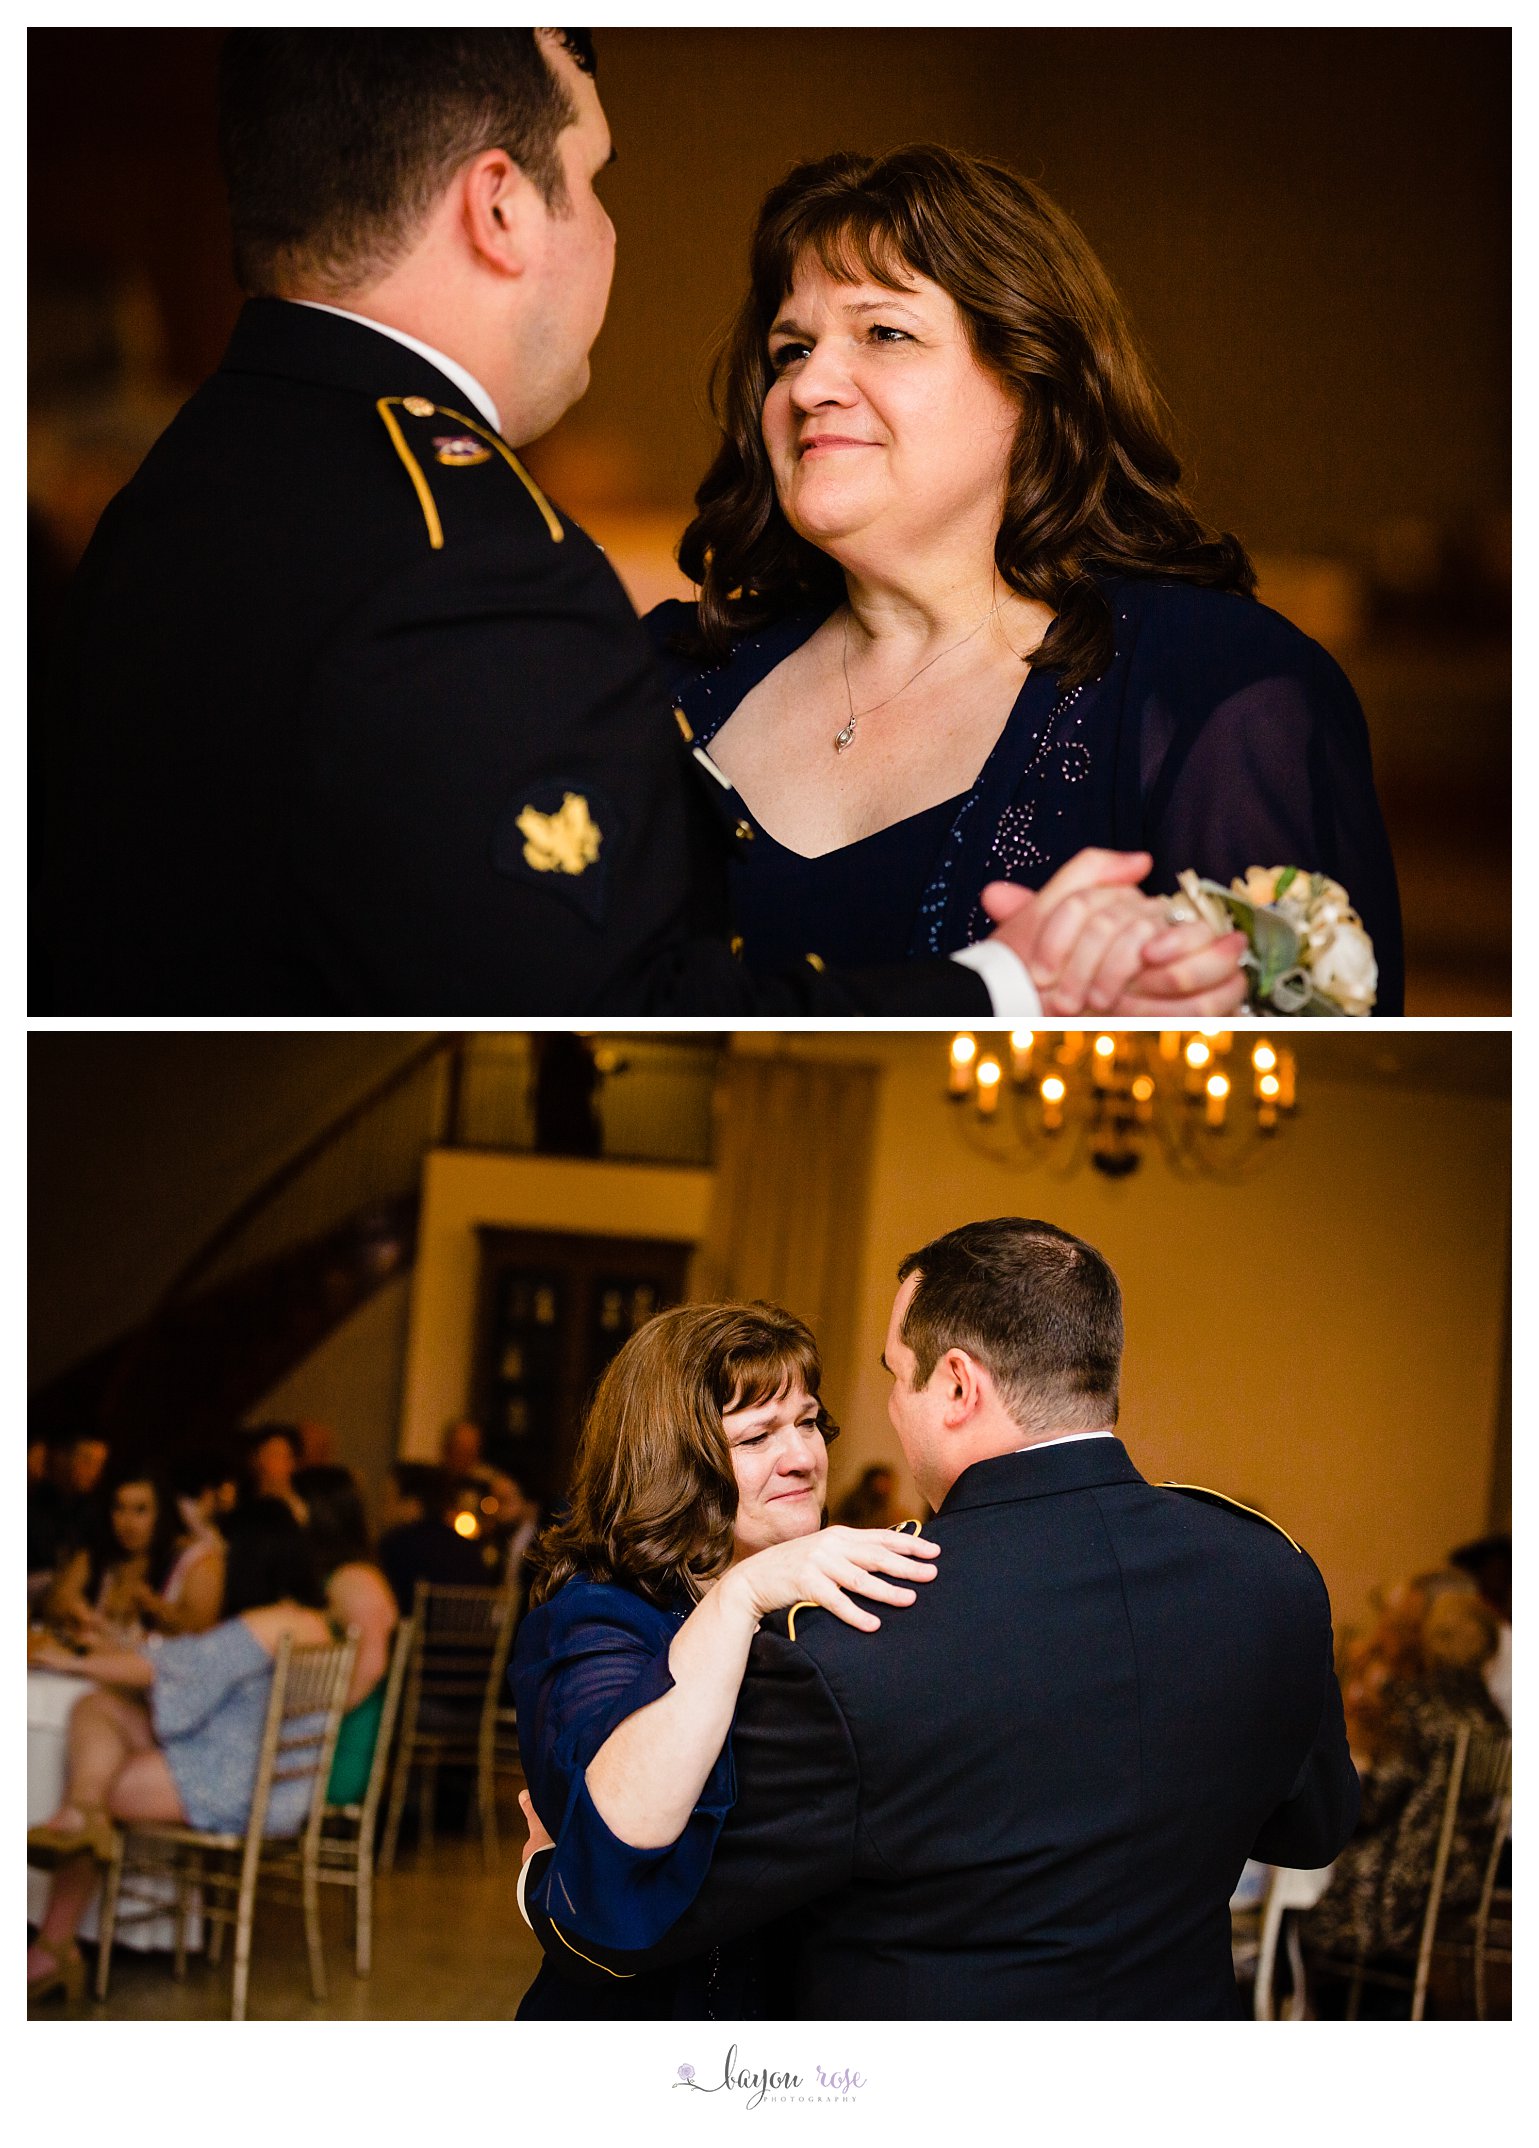 mother son dance at Ashley manor wedding